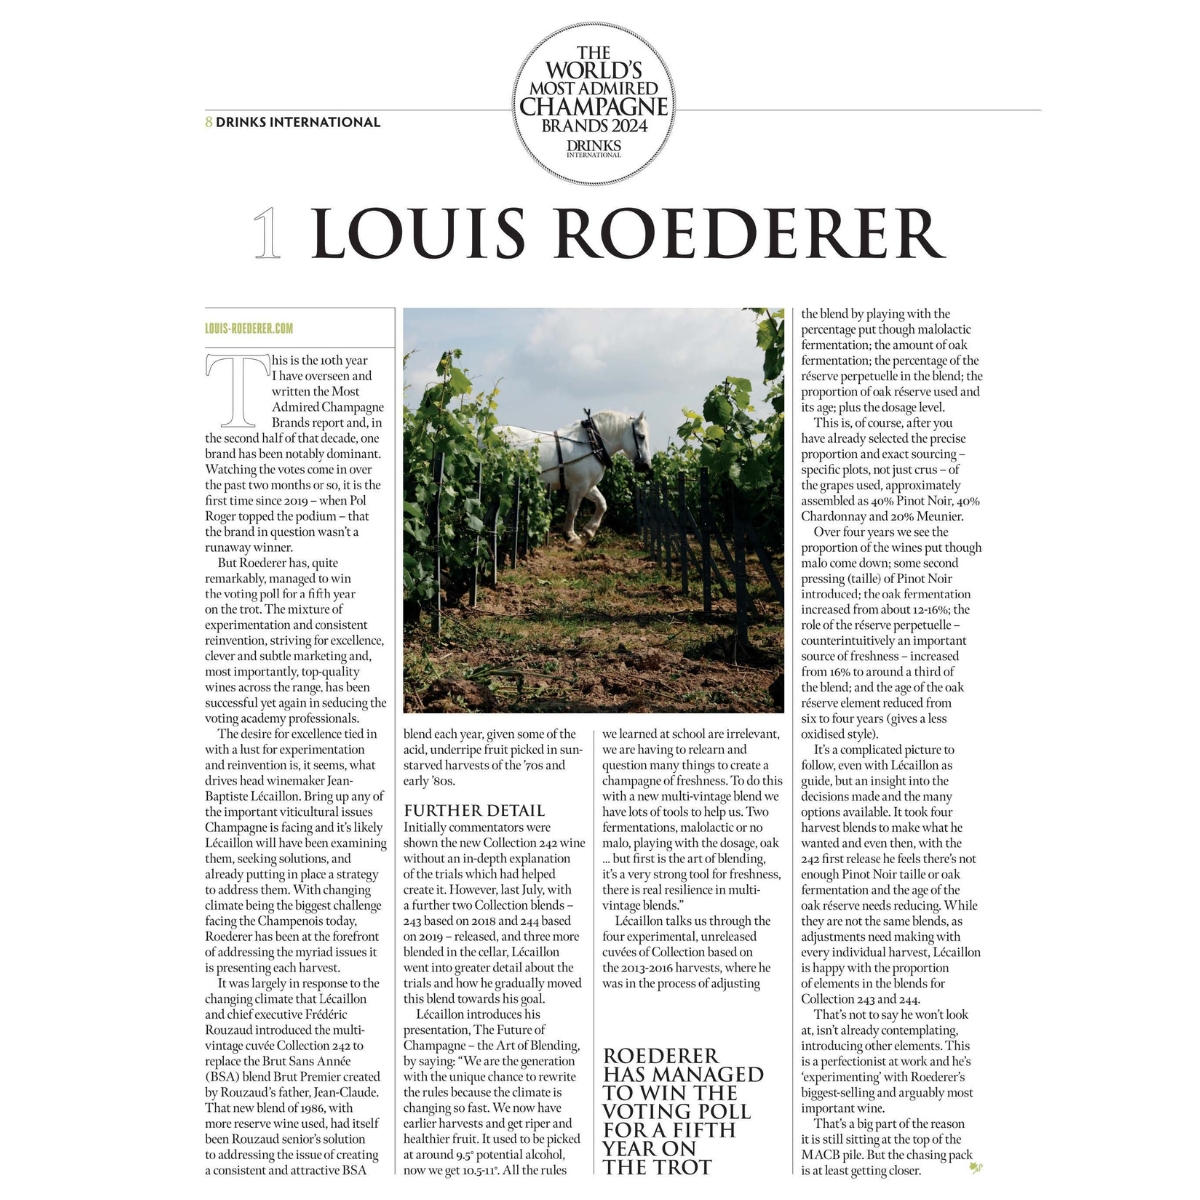 Congratulations to @LouisRoederer_ for its recognition as the #1 'World's Most Admired Champagne Brand' for the fifth year in a row by @DrinksIntMag! #TeamRoederer @JbLecaillon #HandinHandWithNature